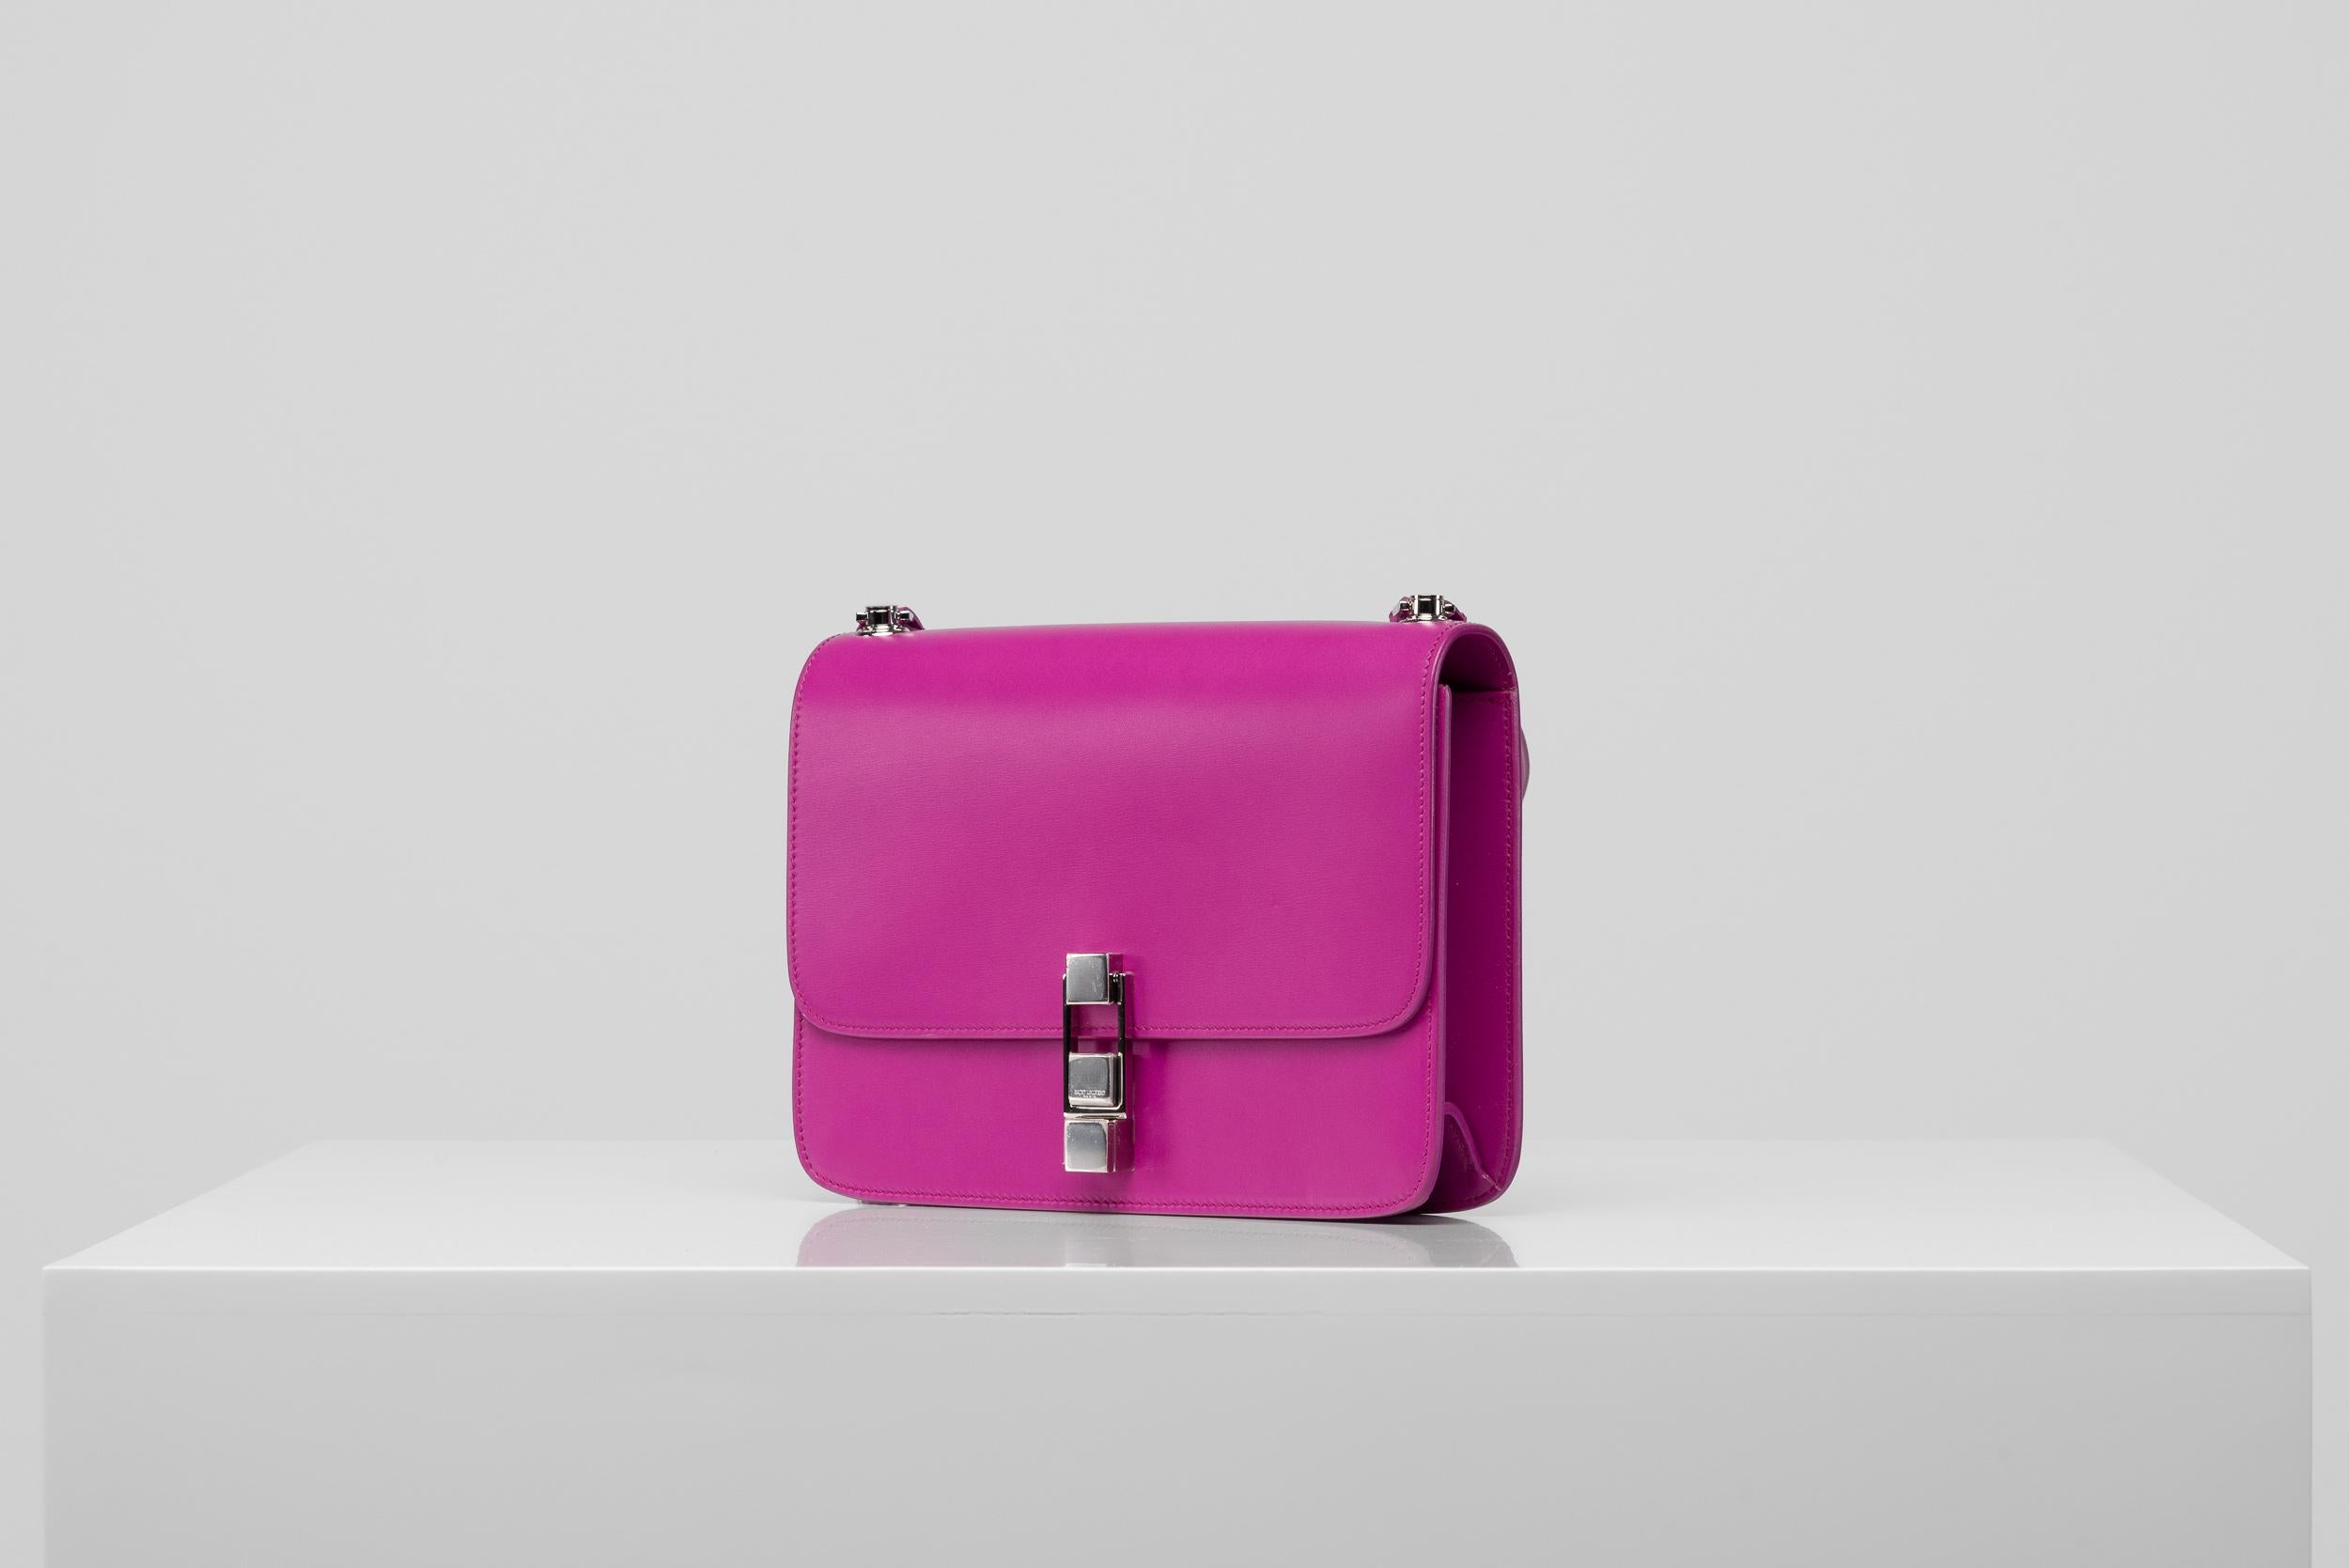 Yves Saint Laurent Bag Le Carre Satchel Bag Purple magenta  In Good Condition For Sale In Roosendaal, NL